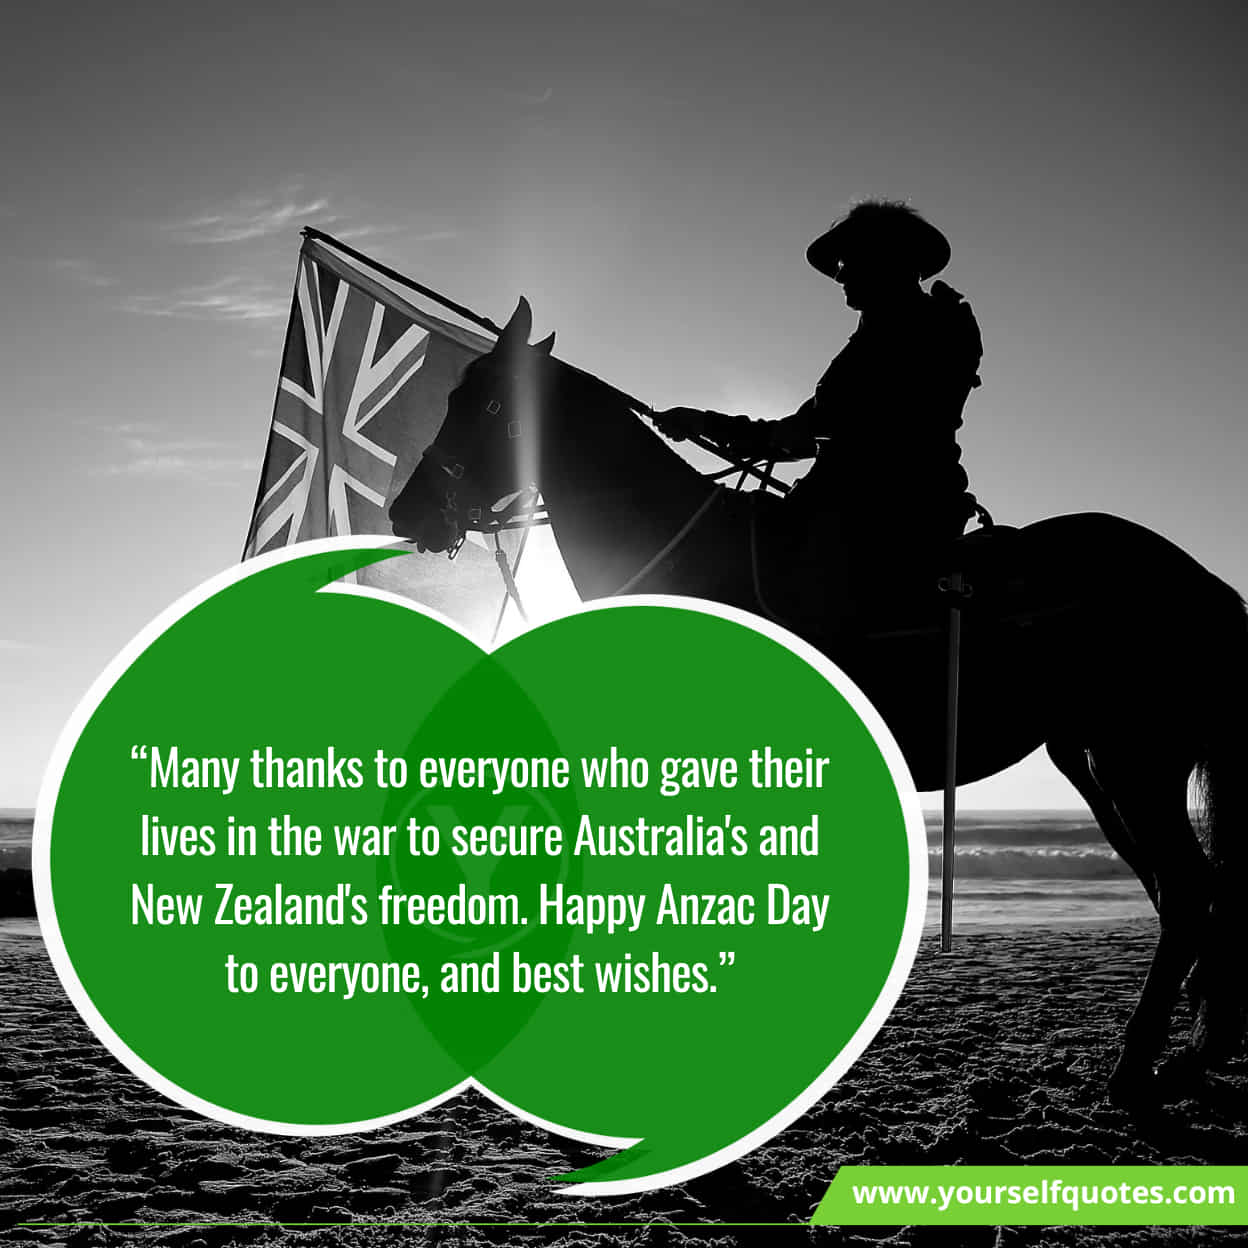 Inspirational Messages For Anzac Day